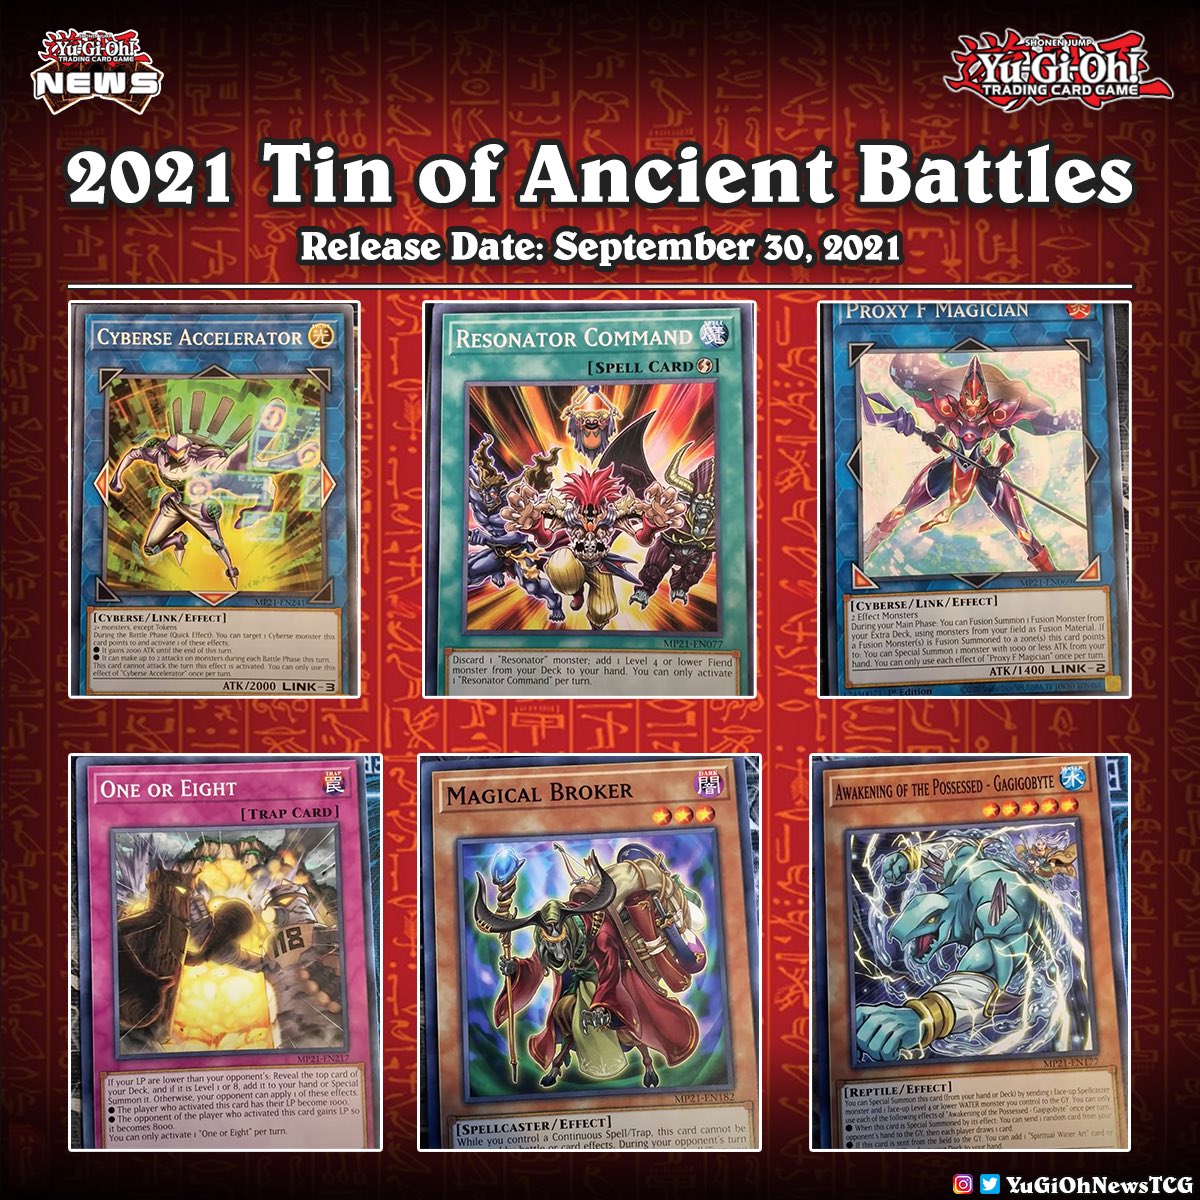 YuGiOh News on Twitter: "❰2021 𝗧𝗶𝗻 𝗼𝗳 𝗔𝗻𝗰𝗶𝗲𝗻𝘁 𝗕𝗮𝘁𝘁𝗹𝗲𝘀❱  Here are few commons that will be available in the upcoming 2021 Tin of  Ancient Battles❗️🙌🏼 Credit: StechDaddy (Reddit) #遊戯王 #YuGiOh #유희왕  https://t.co/CHnVtN3w33" /